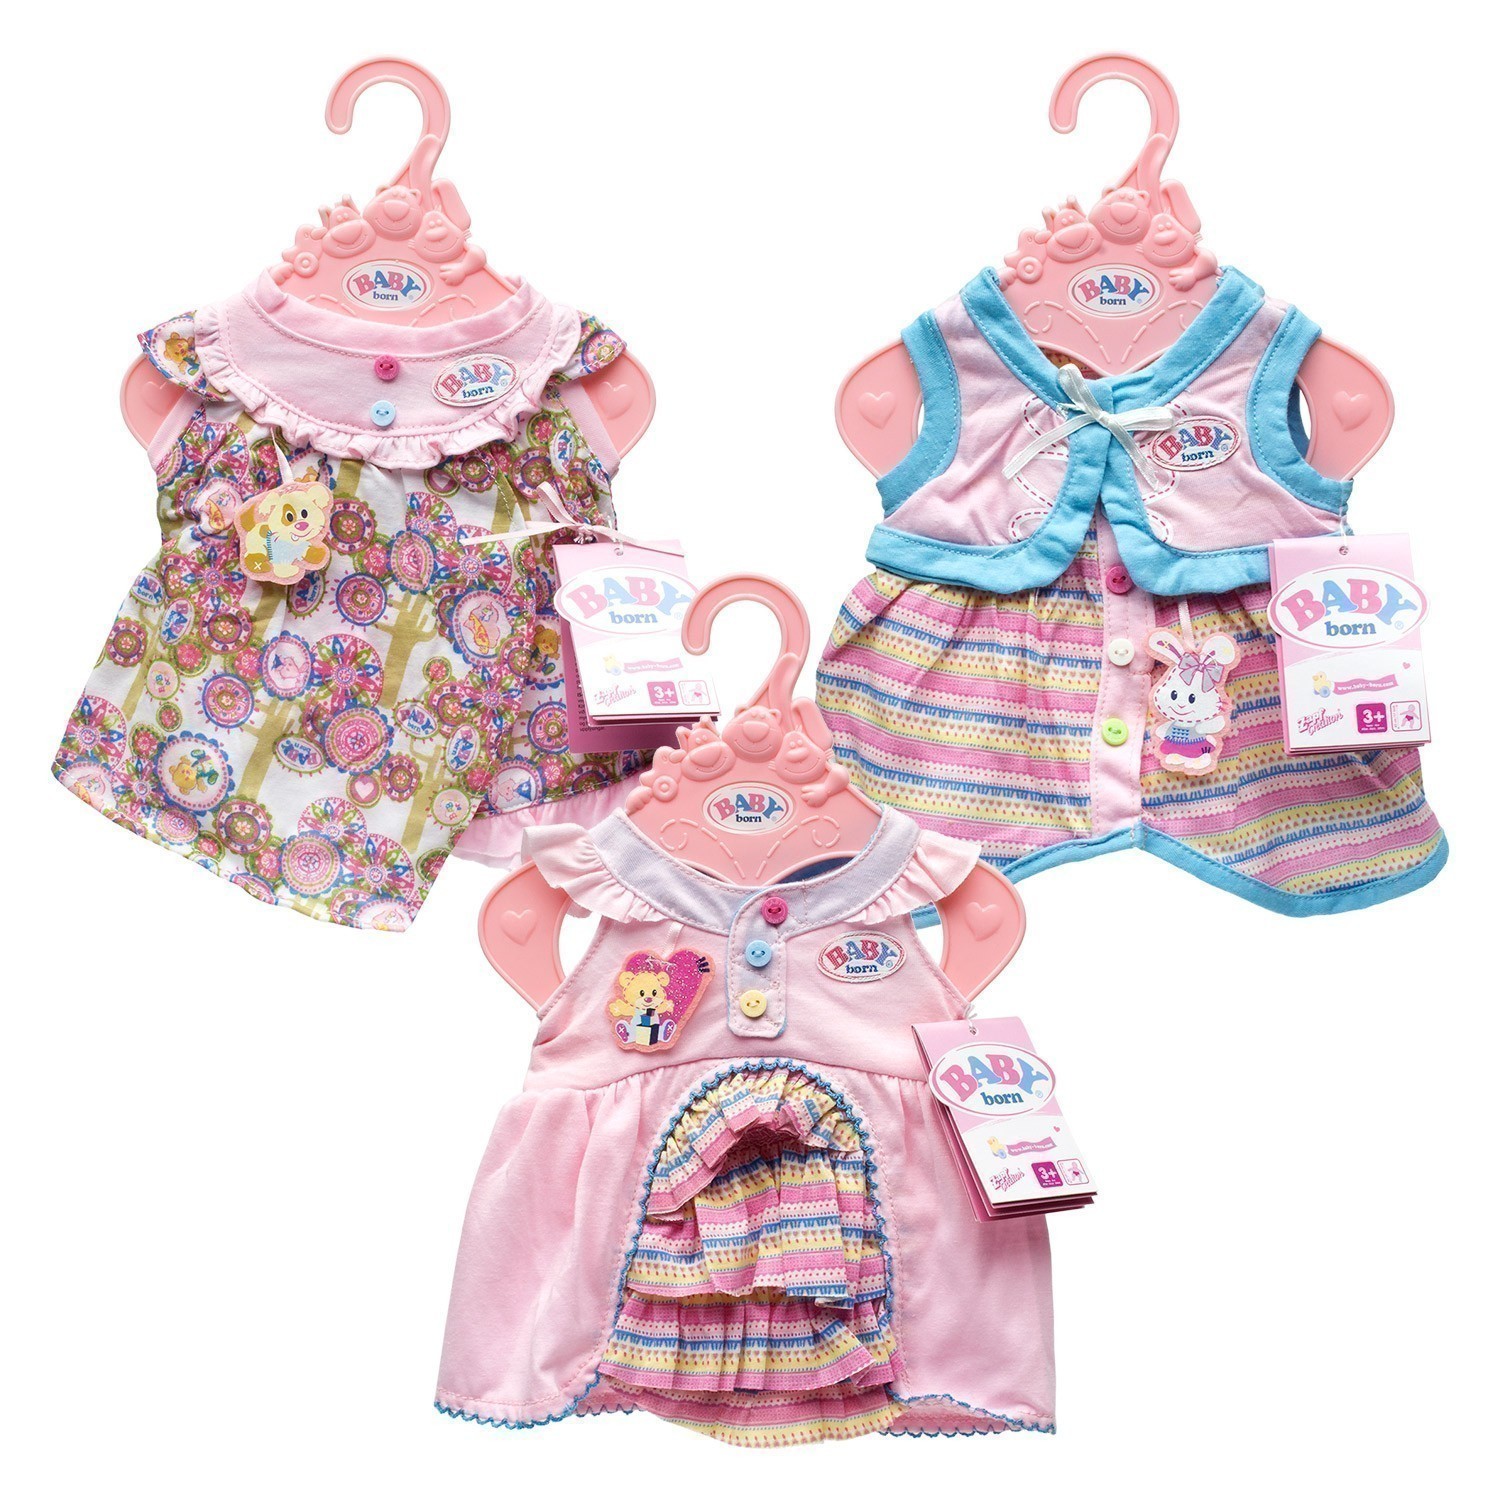 Baby Born - Baby Dress Collection